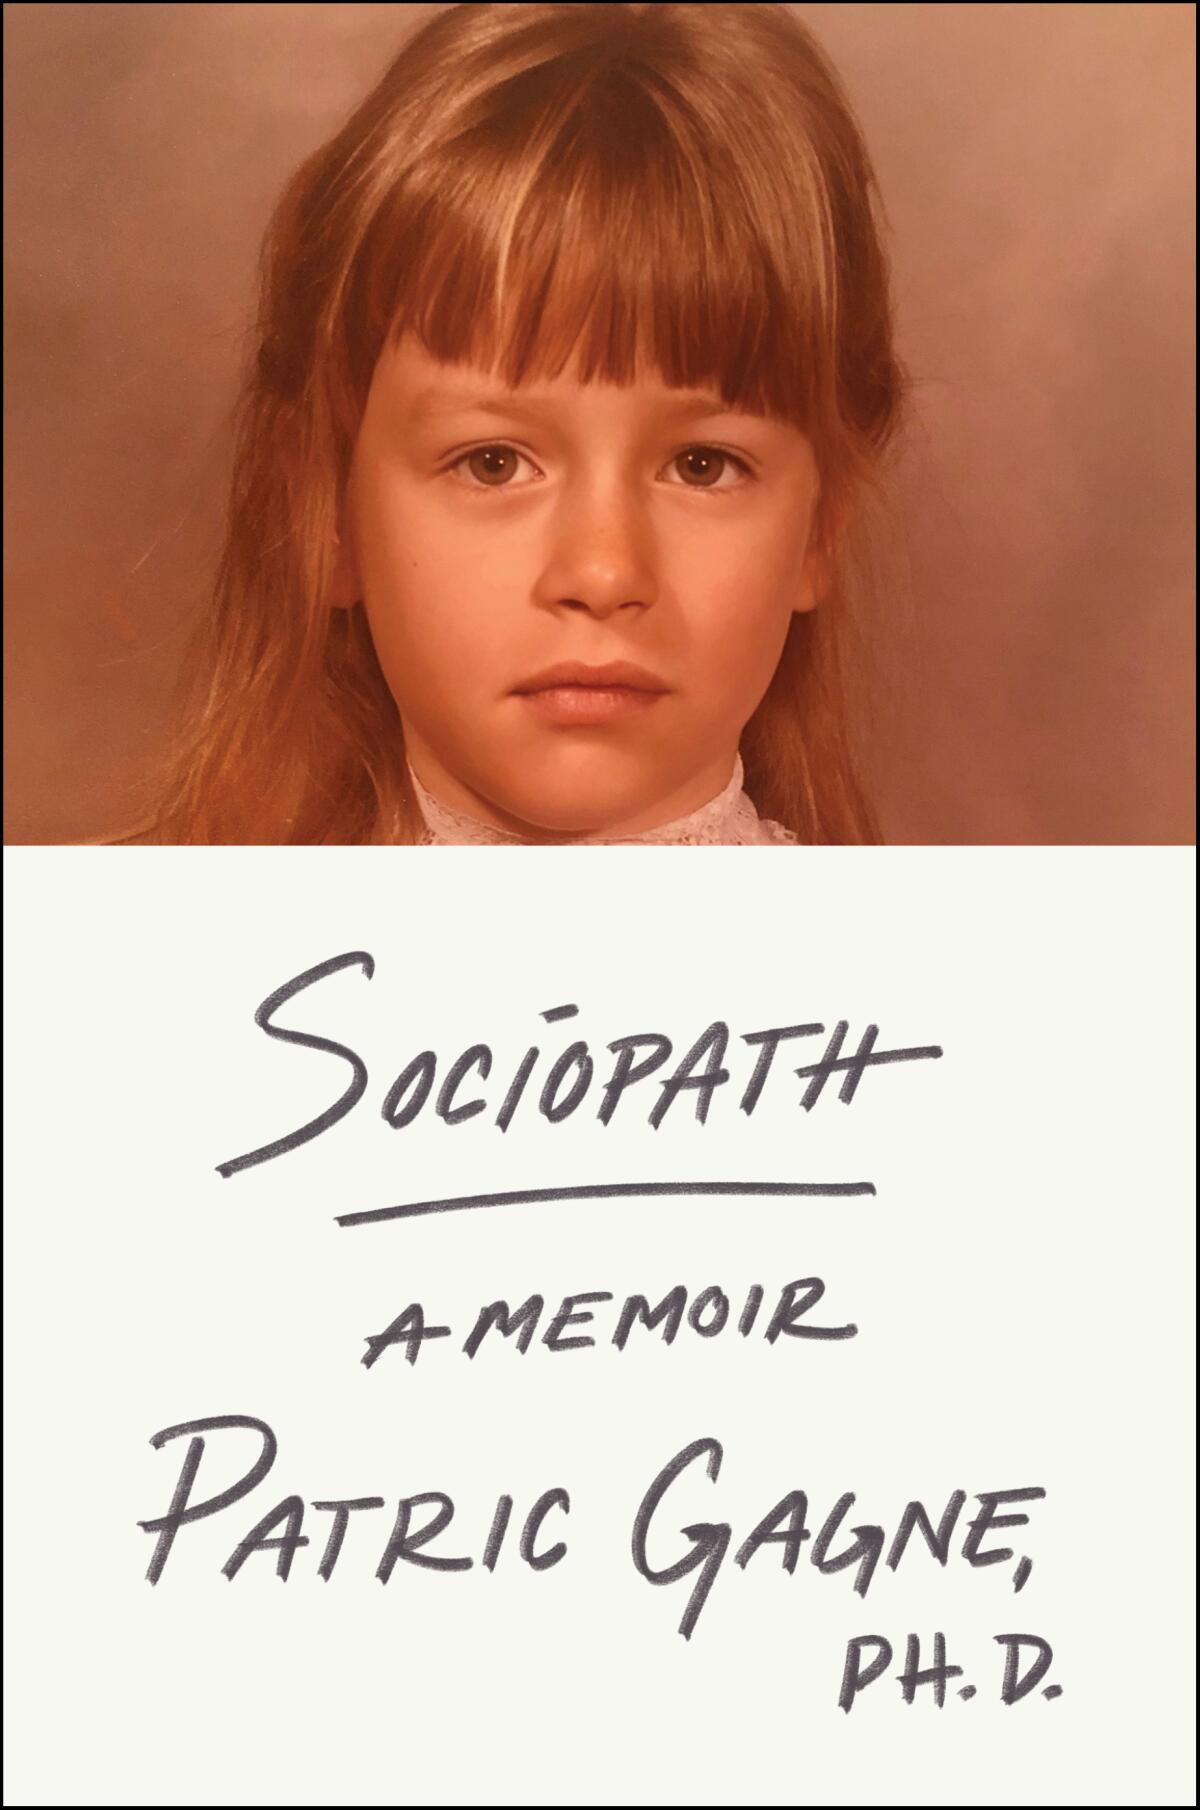 The cover of the book "Sociopath." 